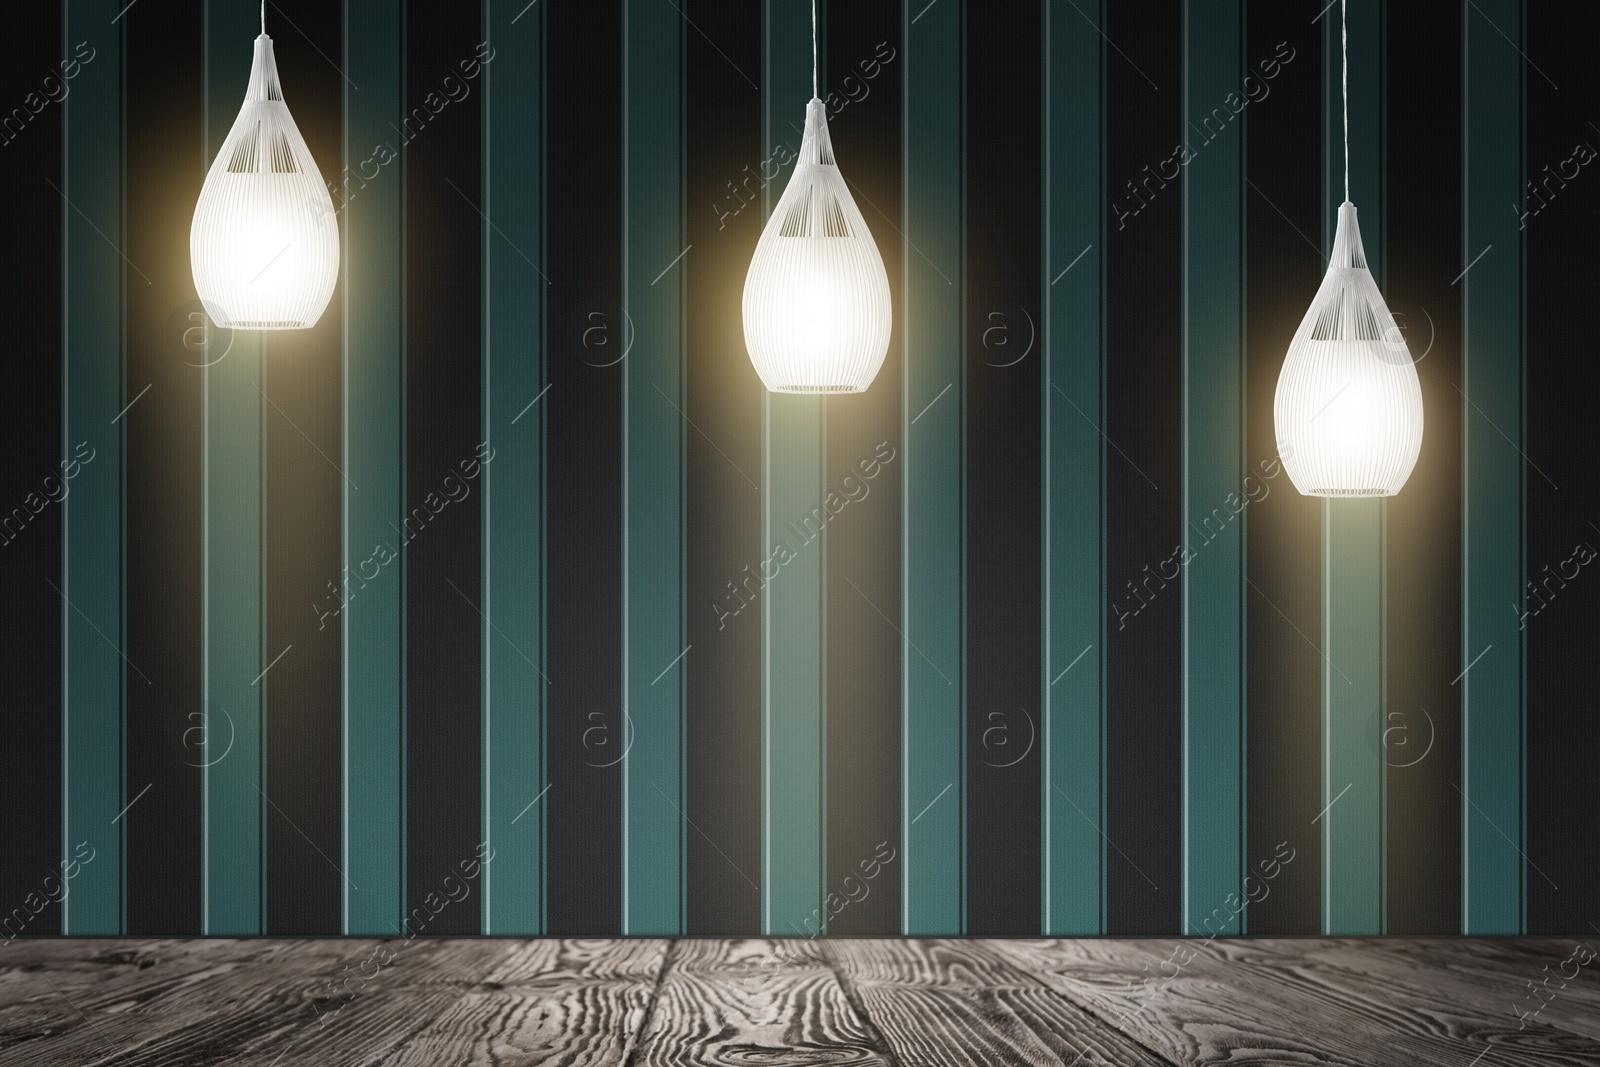 Image of Striped wallpaper and glowing hanging lamps in room